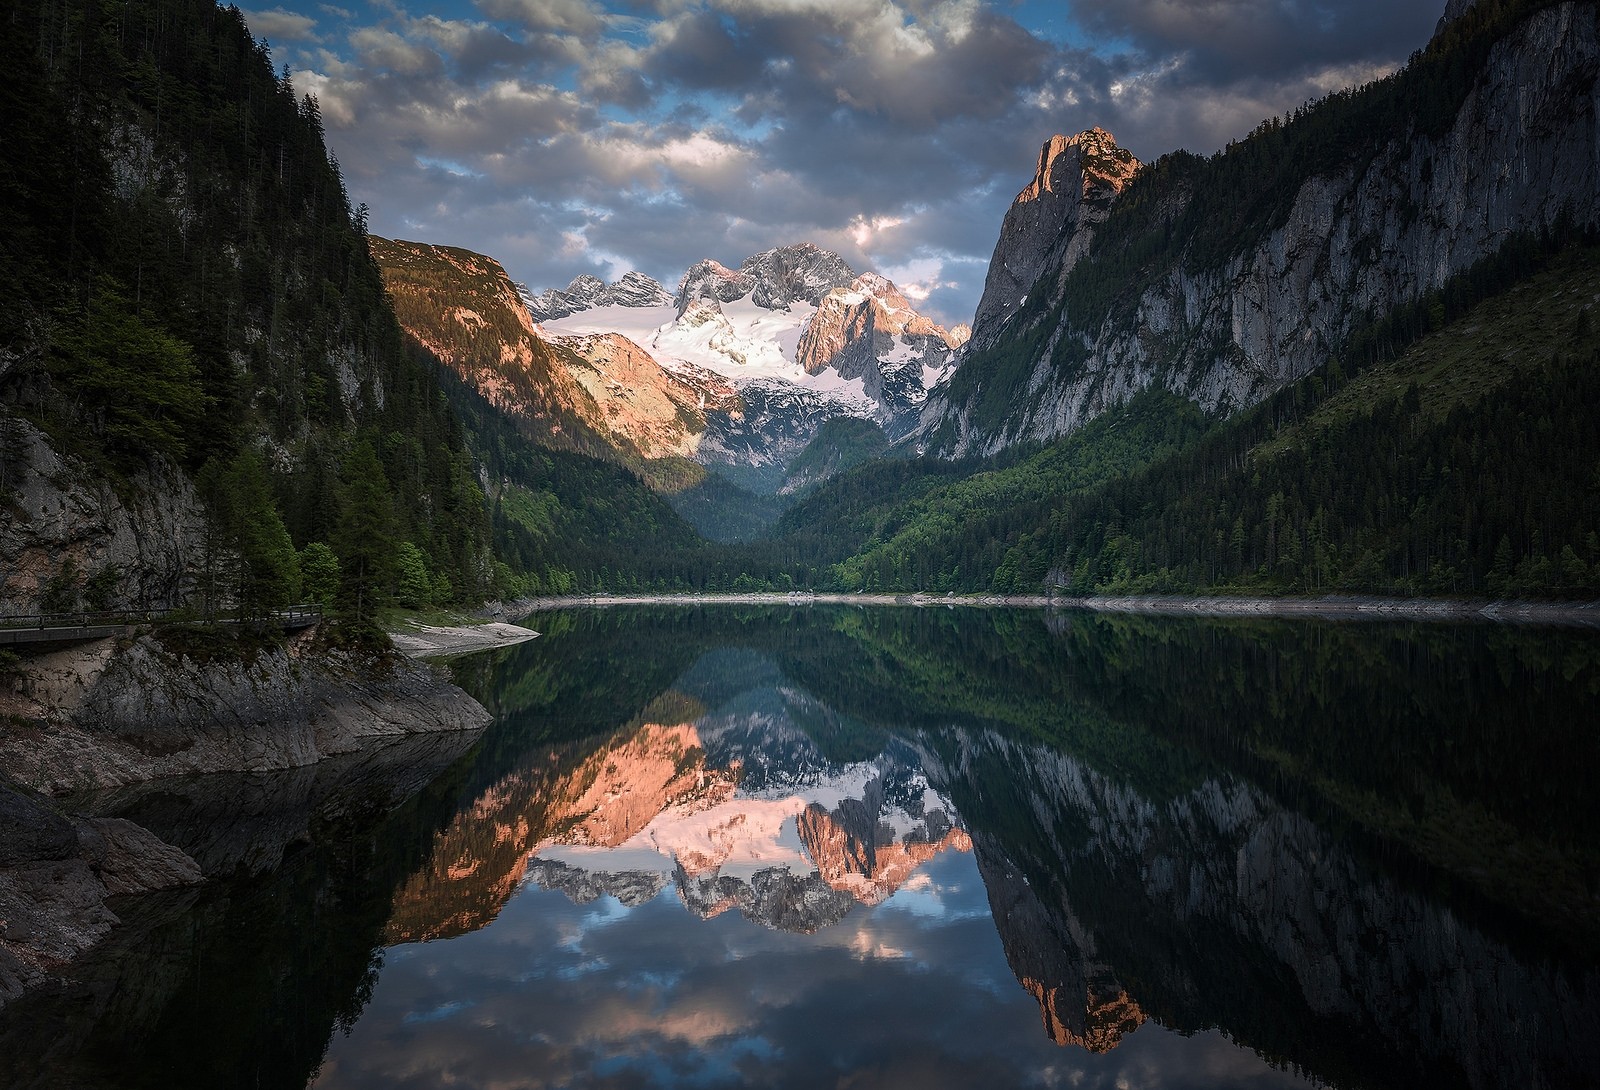 General 1600x1090 photography nature landscape mountains lake reflection snow clouds forest path Alps Austria